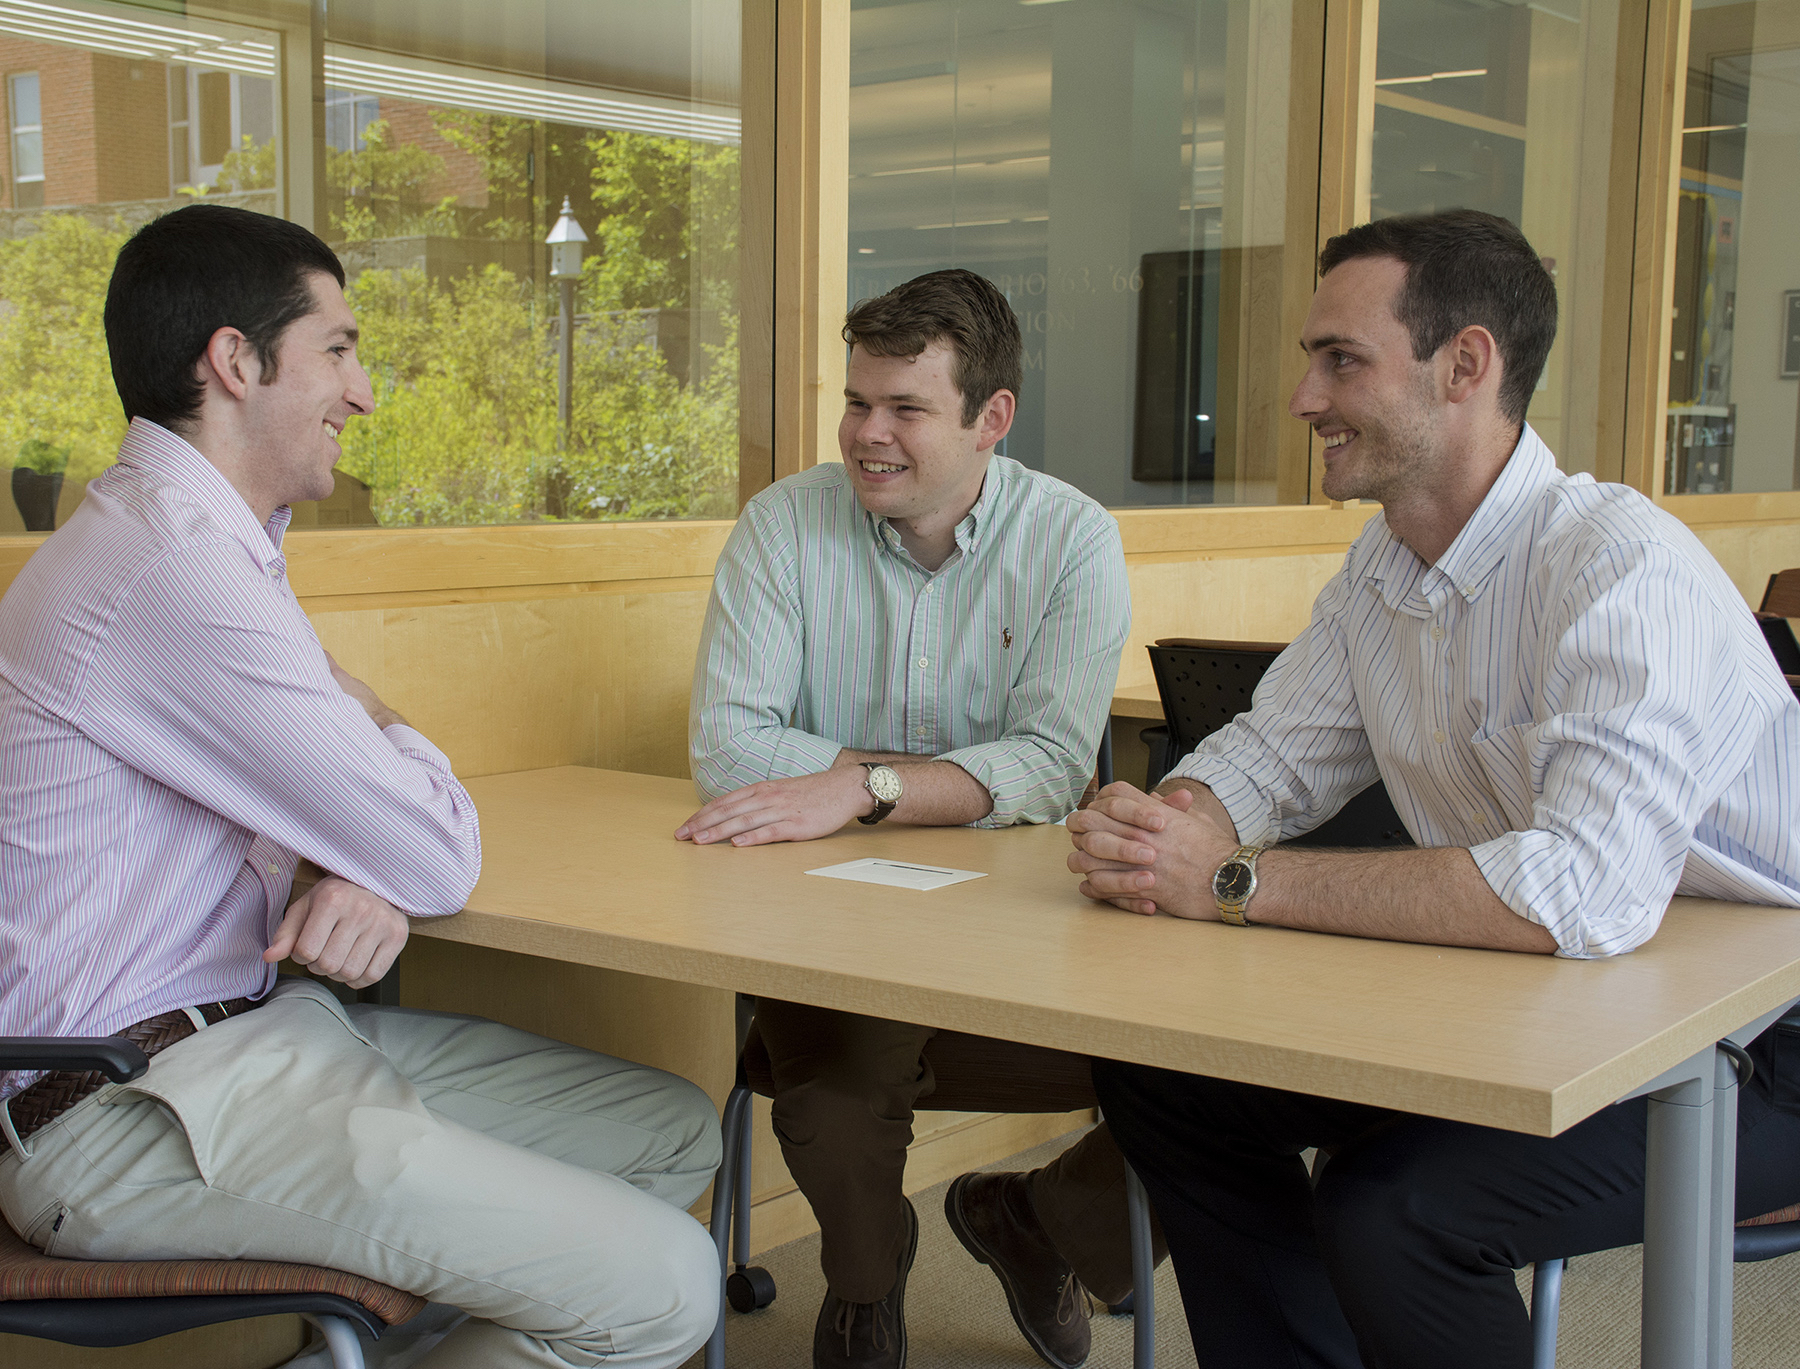 FROM LEFT, Nicholas DaSilva, Kenneth Rose and Benjamin Barlock, doctoral students at the University of Rhode Island’s College of Pharmacy, which is part of the Academic Health Collaborative, launched a drug development company, Alcinous. They discuss their venture in the pharmacy building on the Kingston Campus in early June. /COURTESY NORA LEWIS